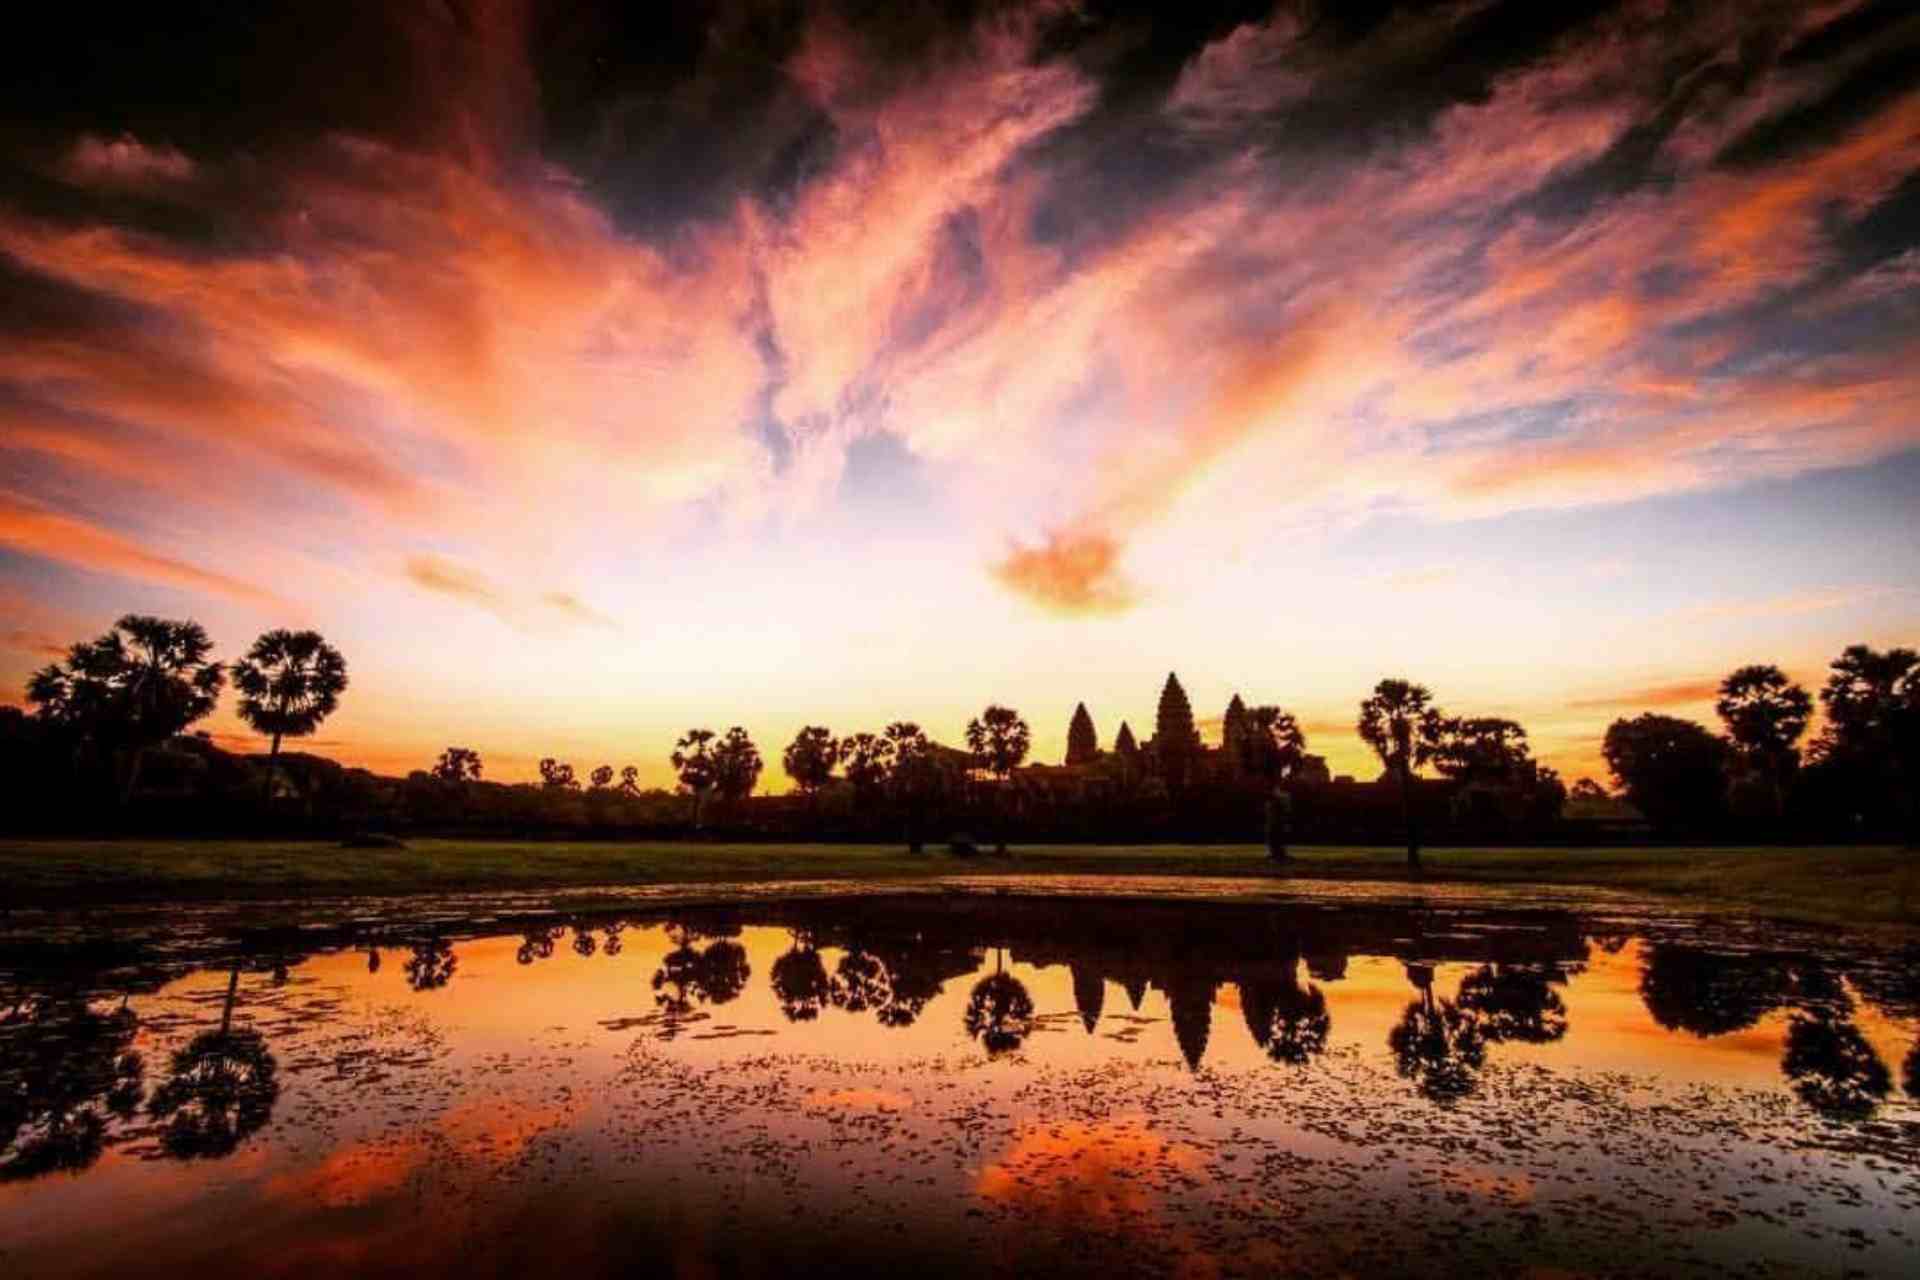 The honeymoon escape tour package offers six days of pure bliss in Siem Reap.